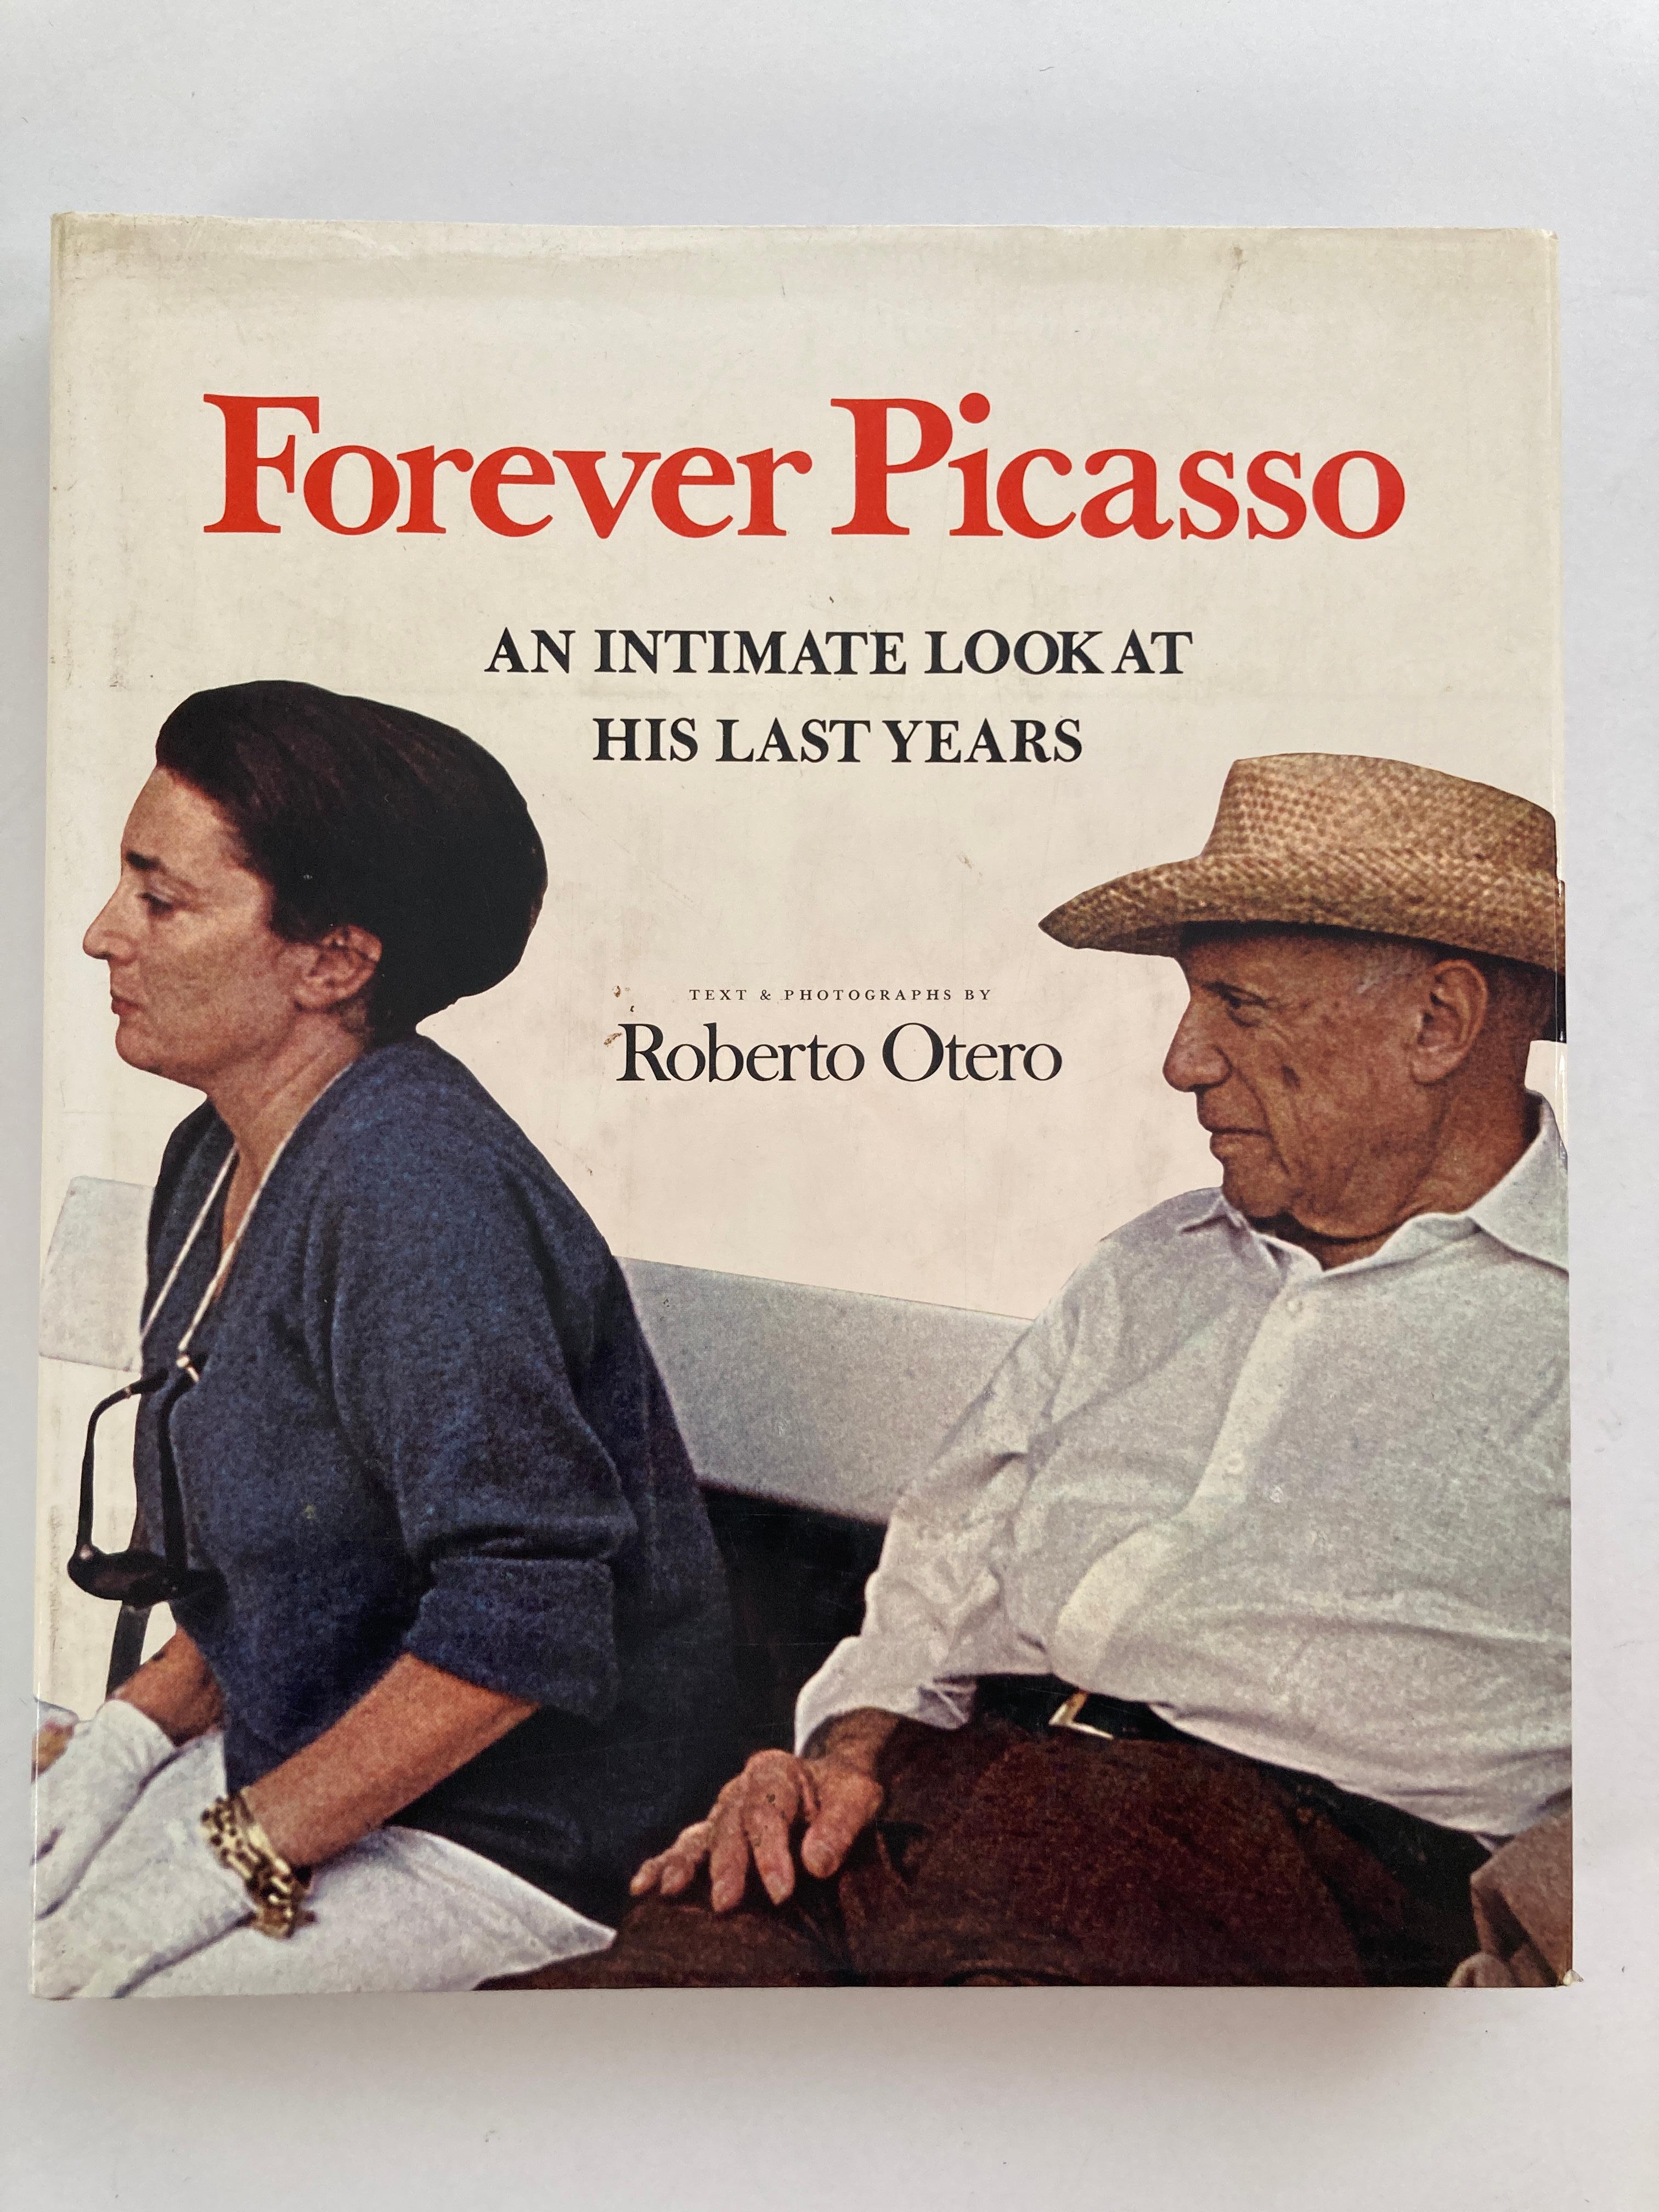 Forever Picasso: An Intimate Look at His Last Years Book
Hardcover. First American edition. Quarto. 197pp.
January 1, 1974
by Roberto Otero (Author)
Title: Forever Picasso: An Intimate Look at His ...
Publisher: New York: Harry N.